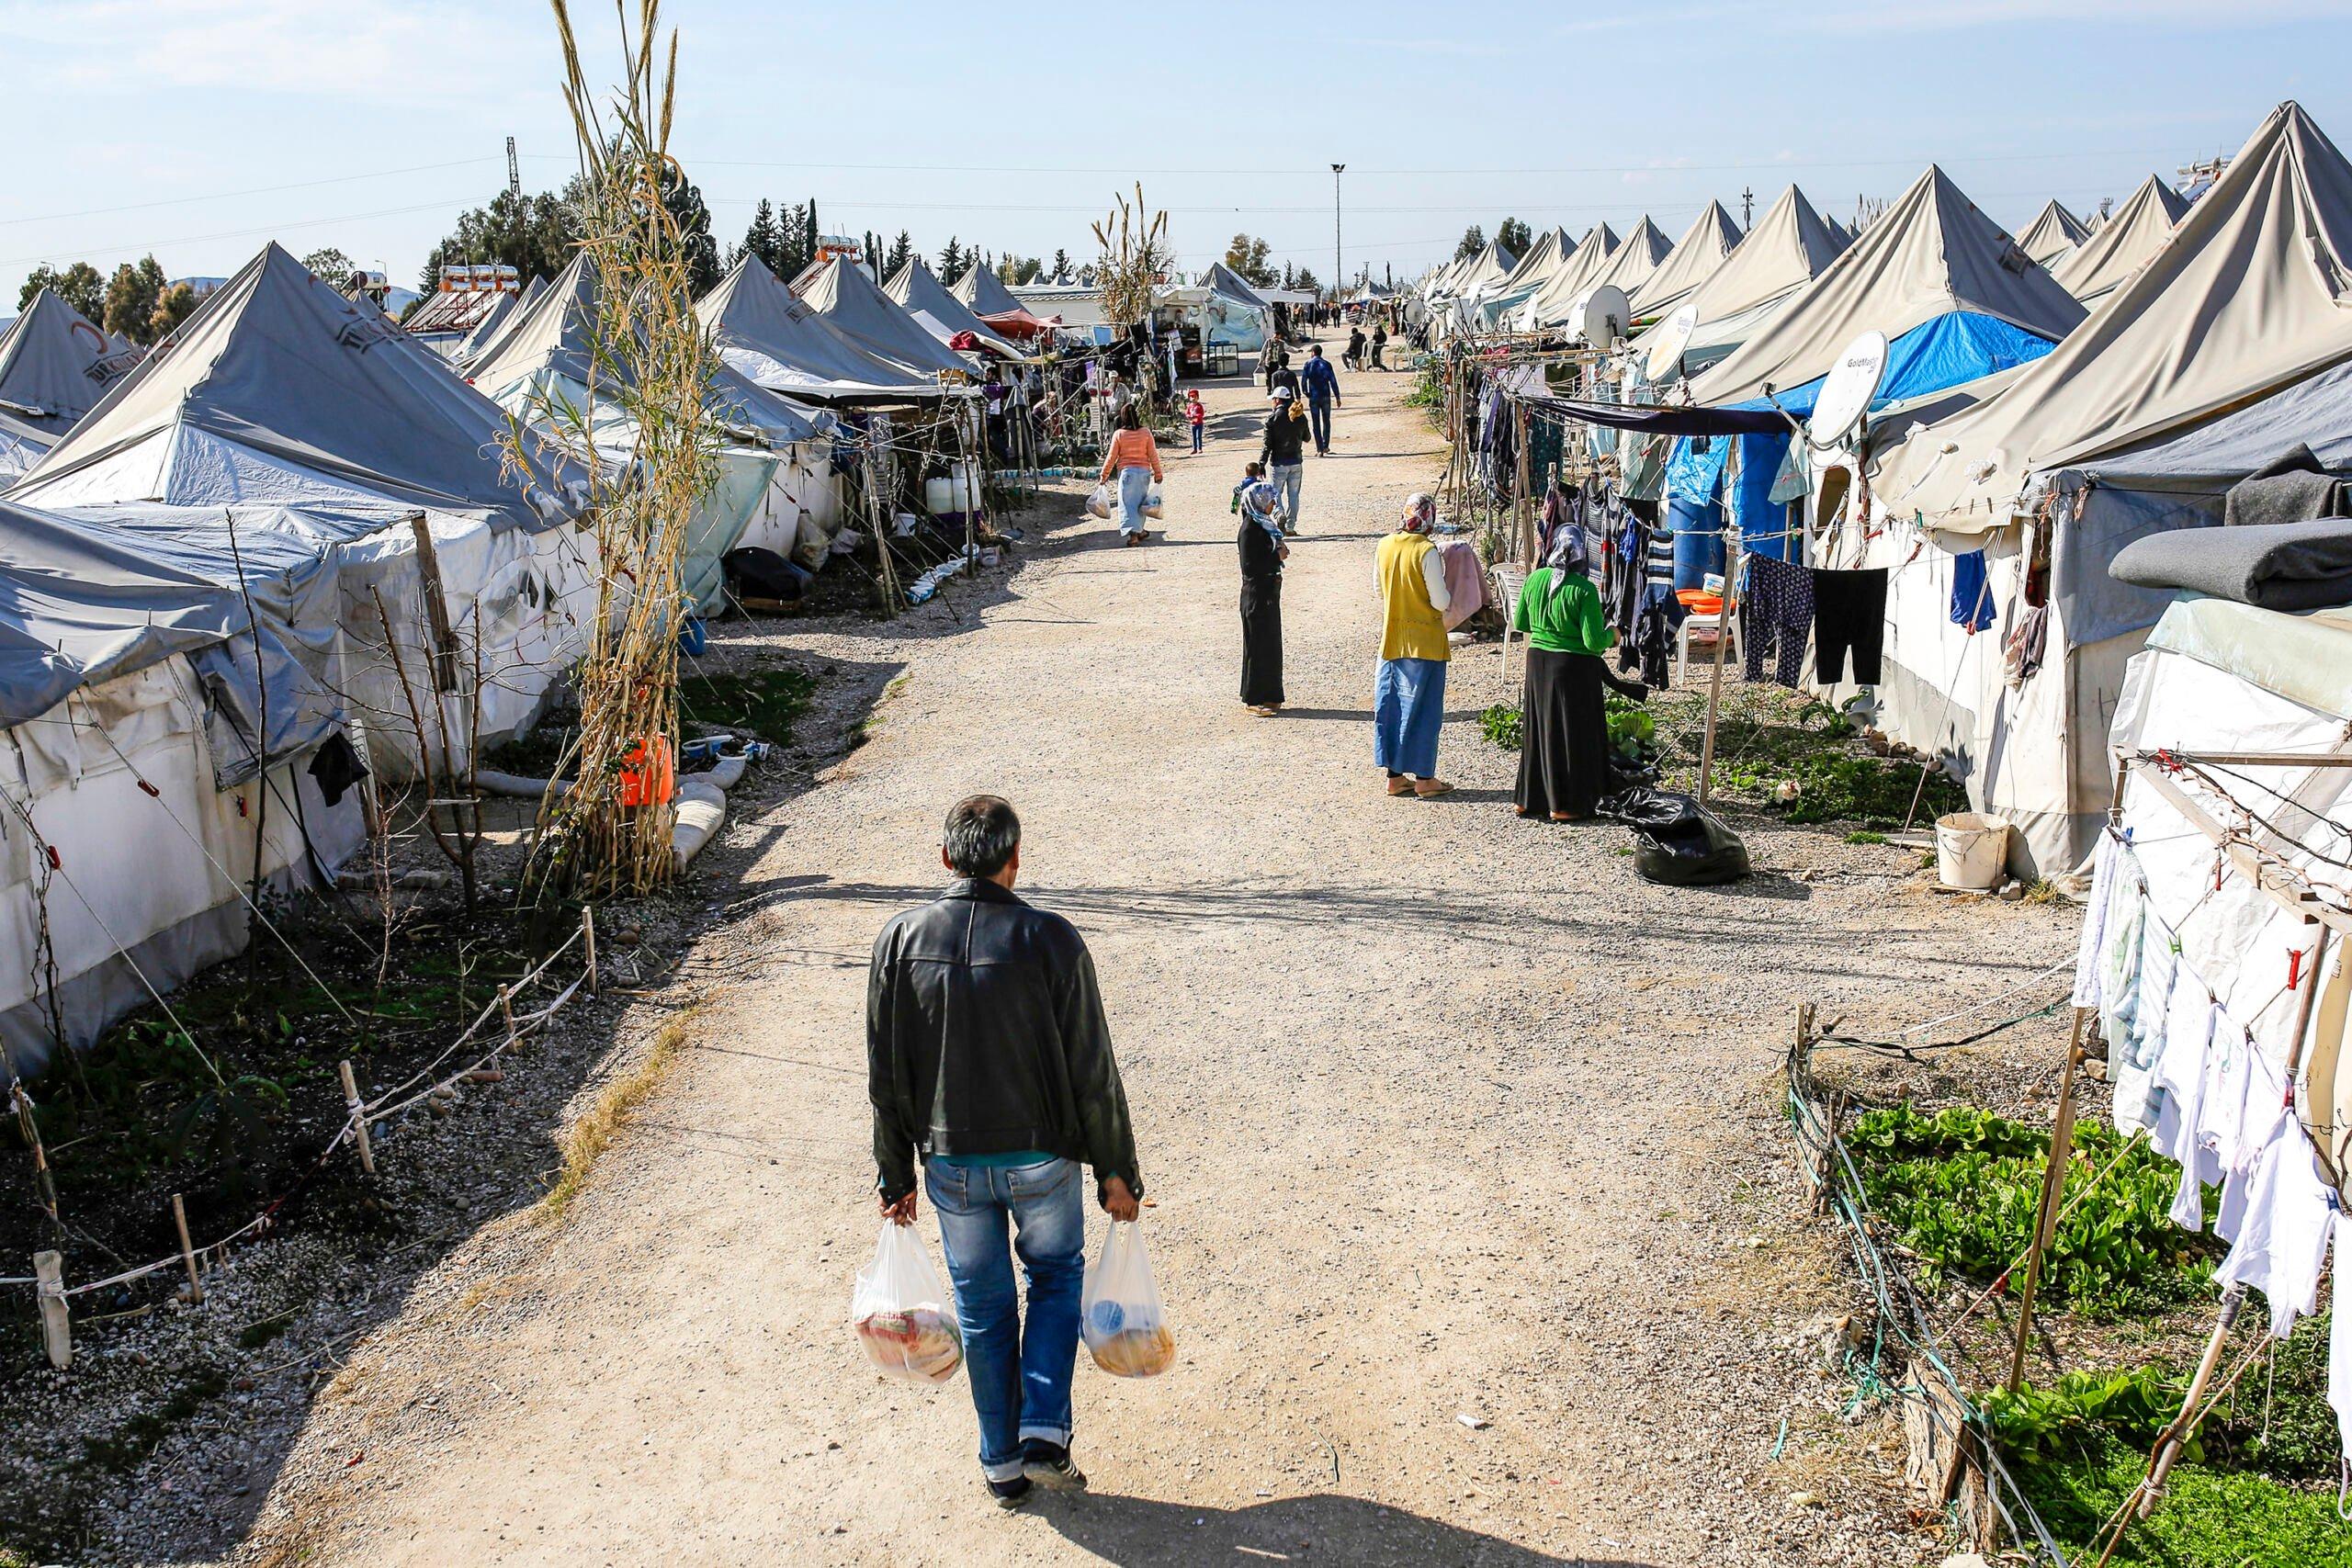 General view of the Osmaniye Cevdetiye Camp, in Turkey on 10th of February, 2016 during a visit by the BUG - Committee on Budgets Delegation of the European Parliament.